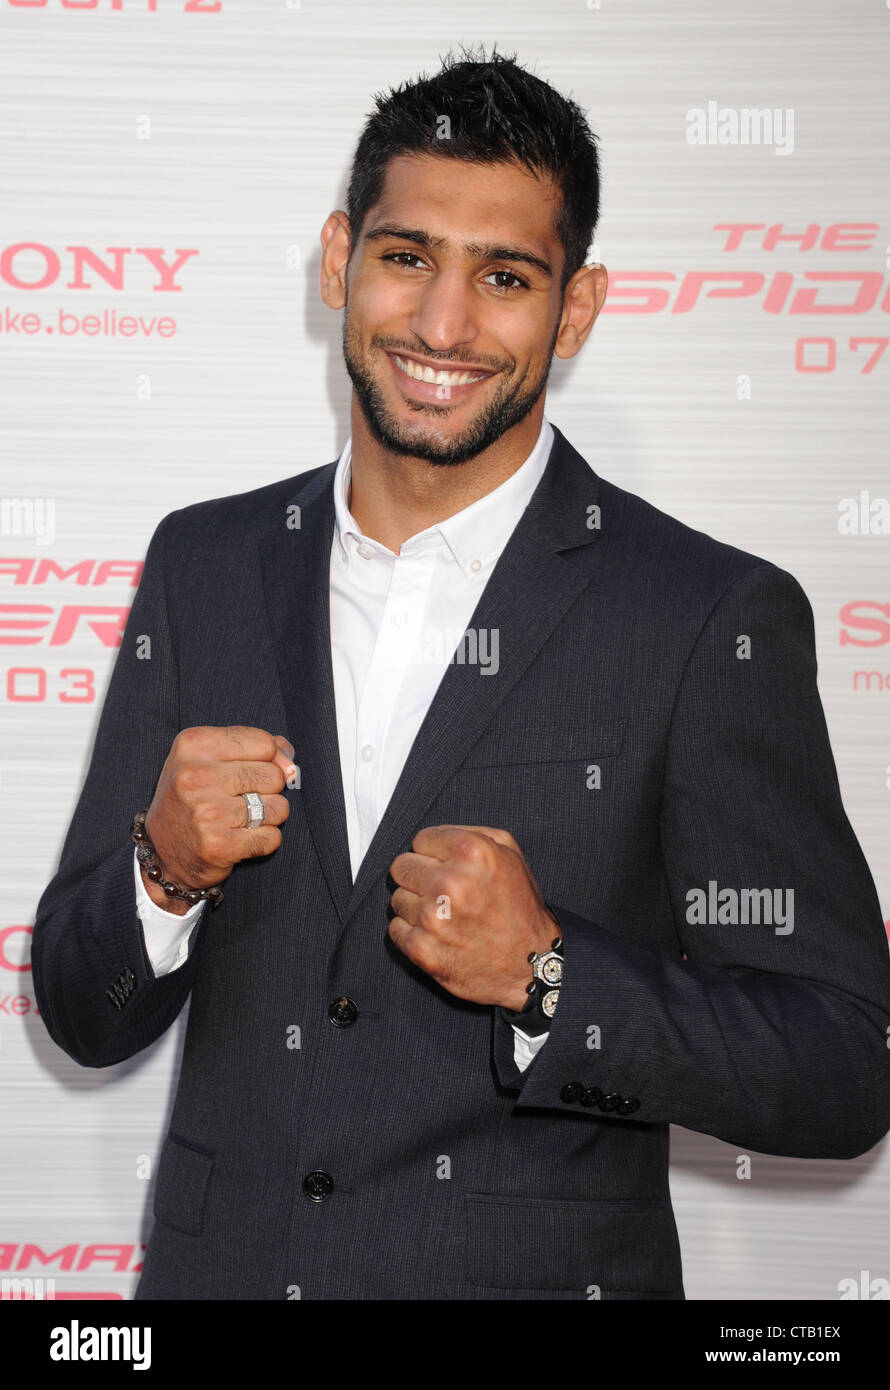 AMIR KHAN  British boxer at a Hollywood event in June 2012. Photo Jeffrey Mayer Stock Photo